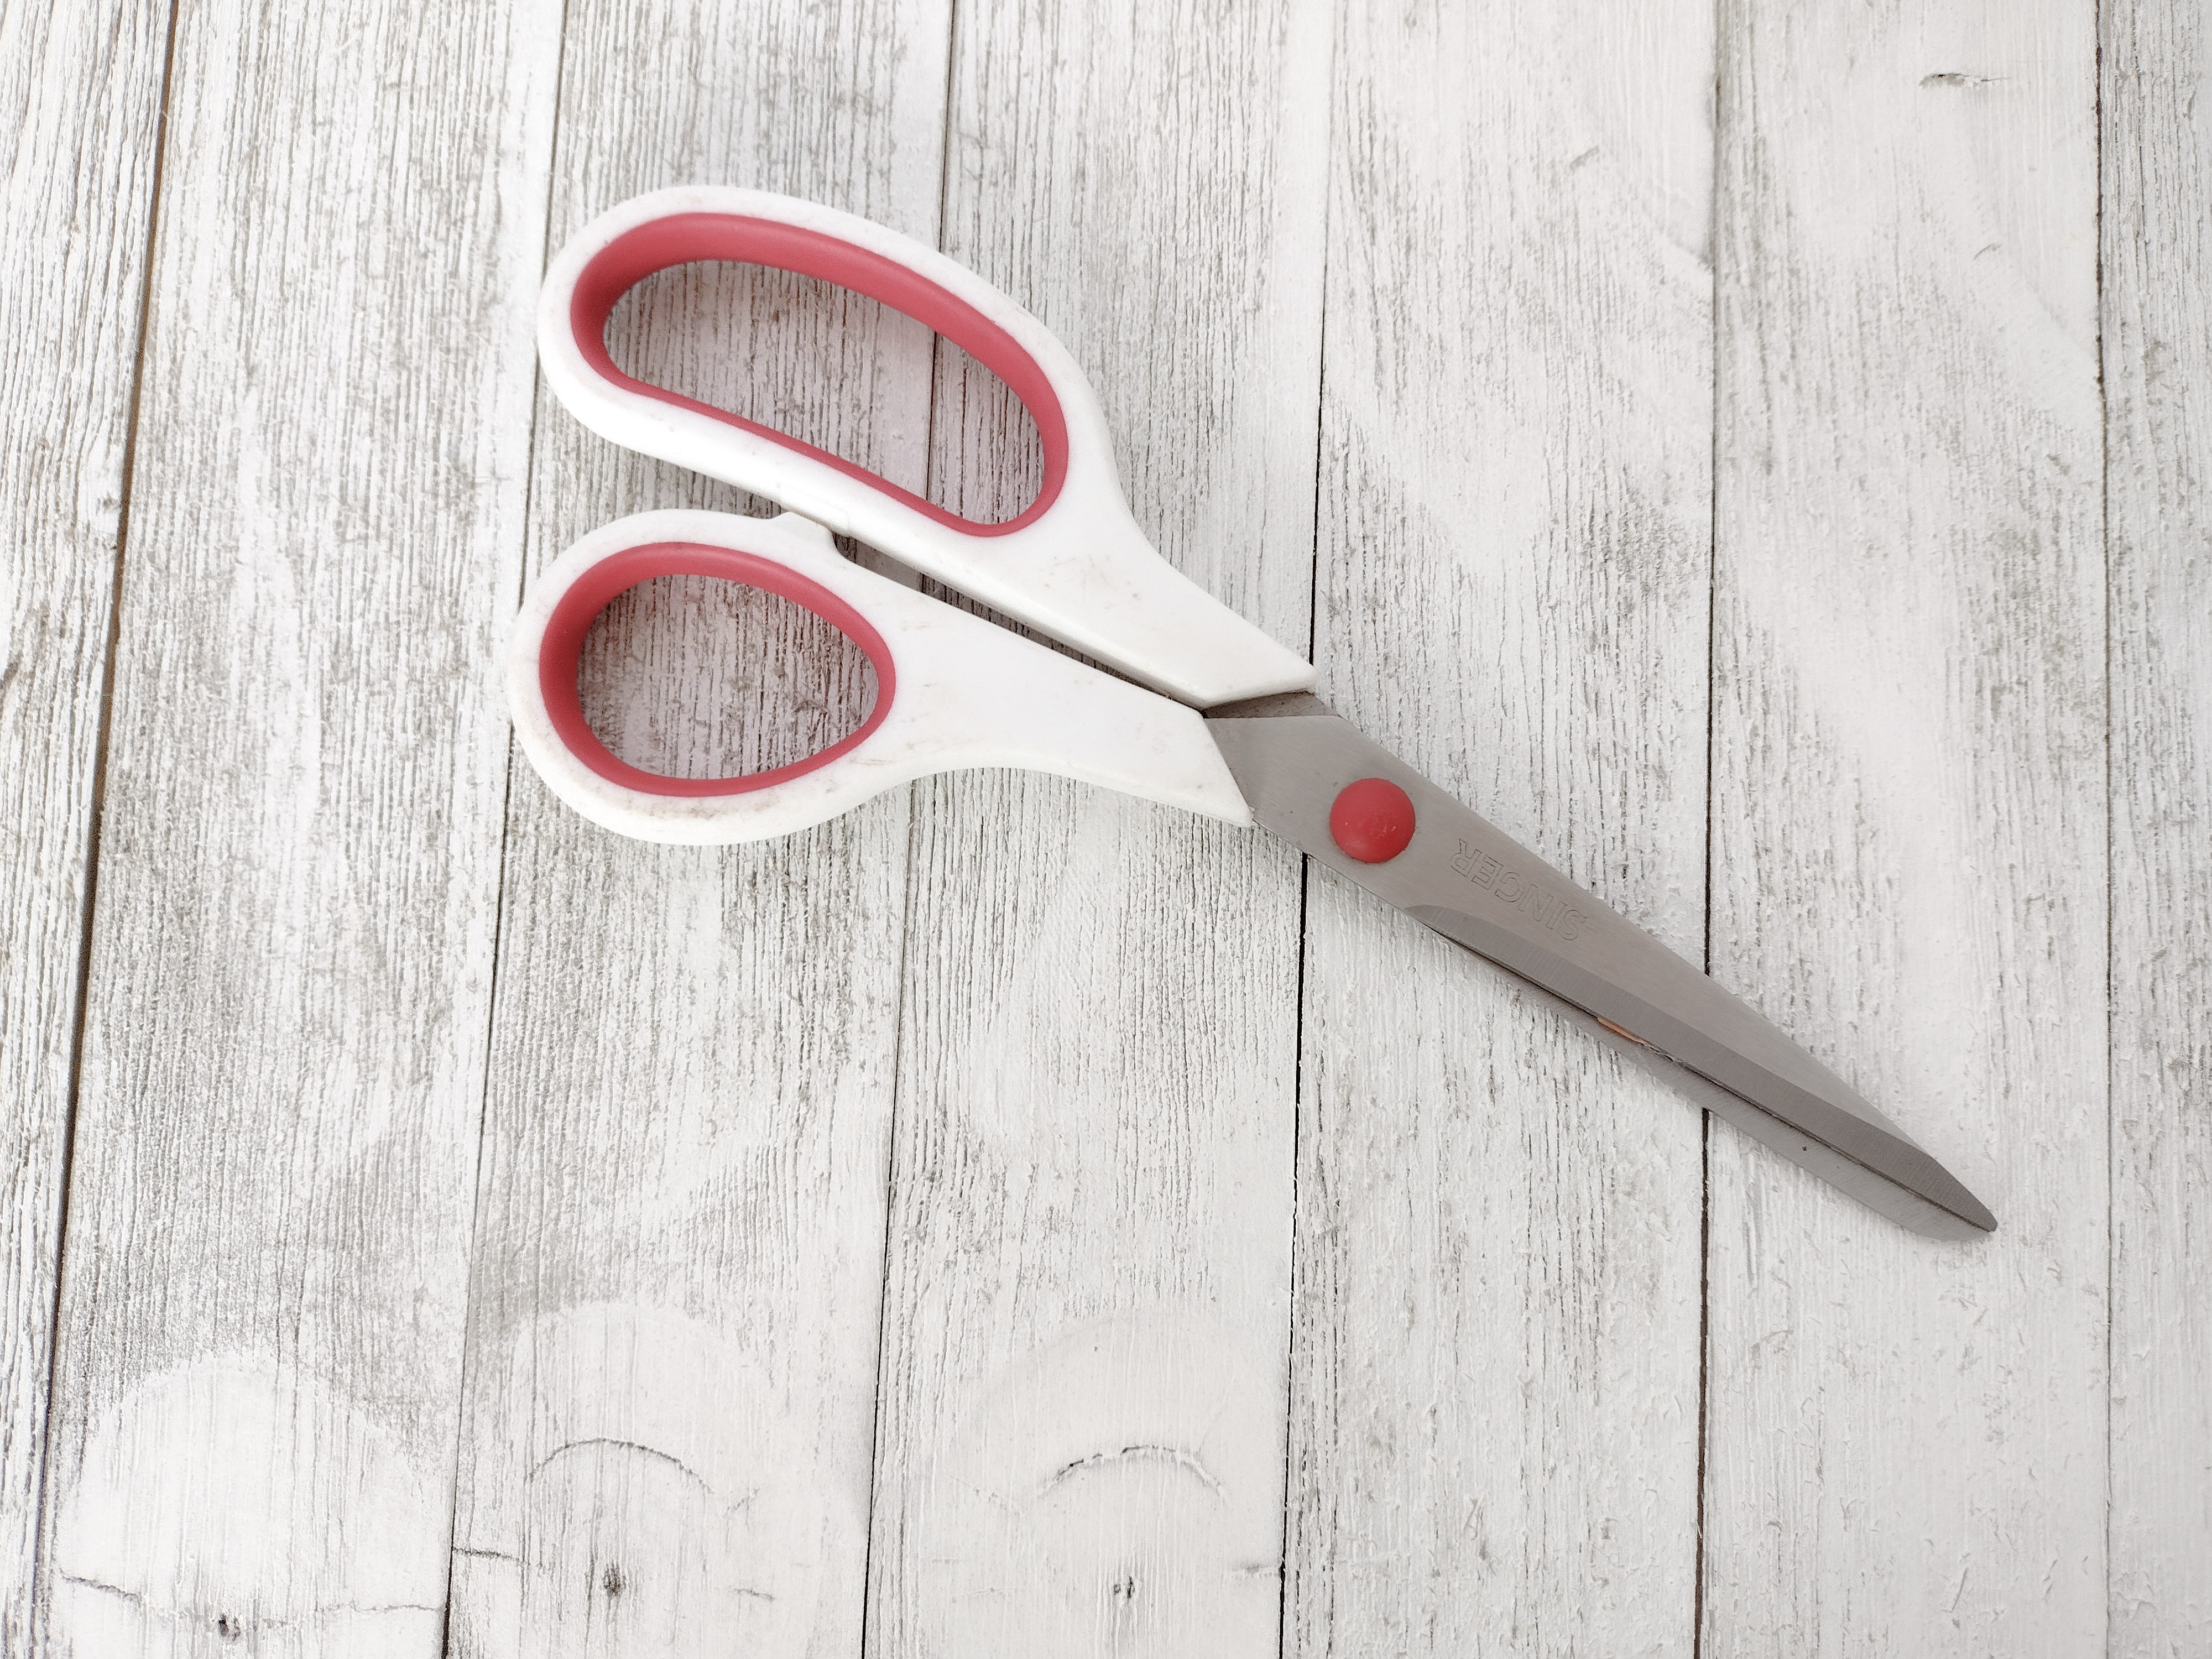 fabric scissors perfect for cutting cotton fabric for embroidering